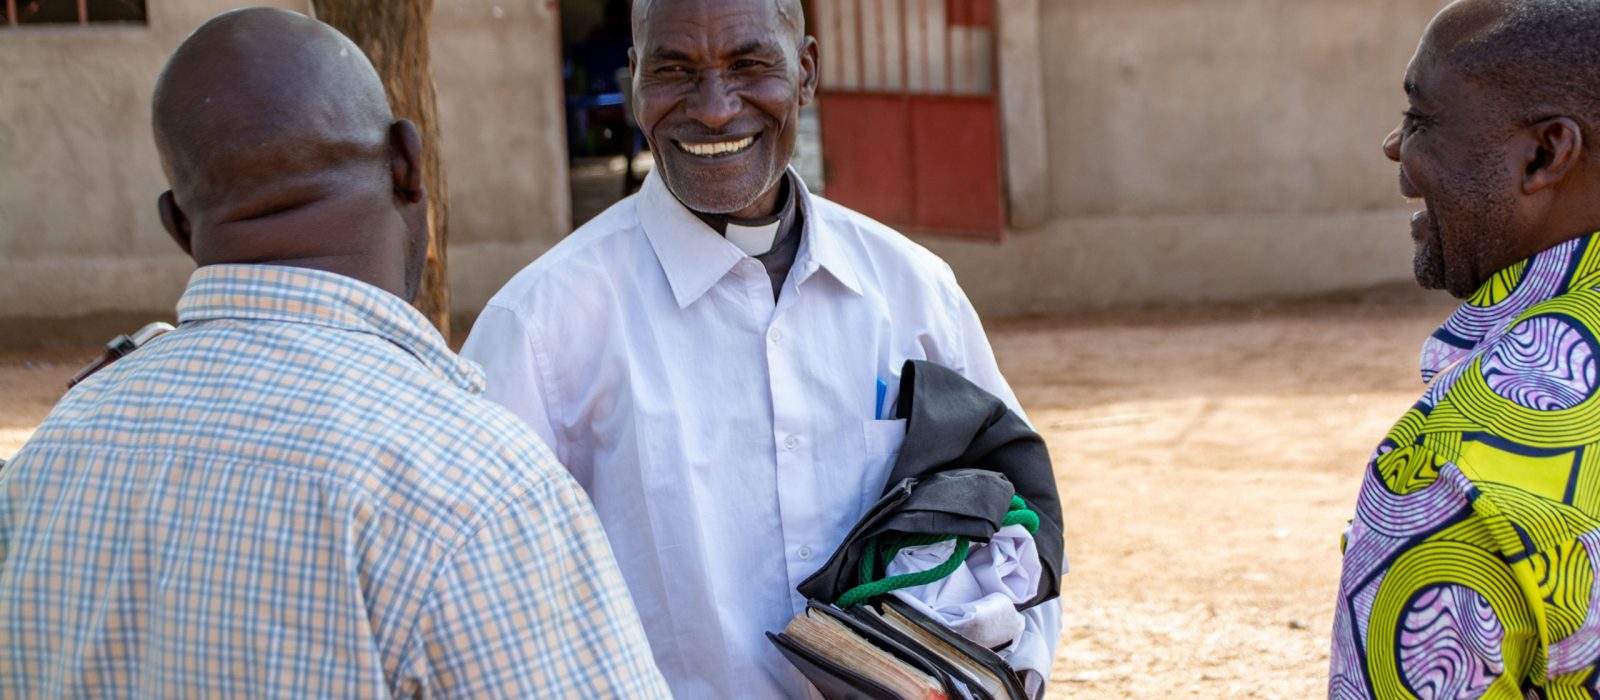 Reverend Mathayo Mika interacts with church members in Dodoma, Tanzania, on 16 January 2022.Tearfund Canada, through its Church-based Community Transformation, provides training in conservation agriculture and savings groups to farmers and their families.